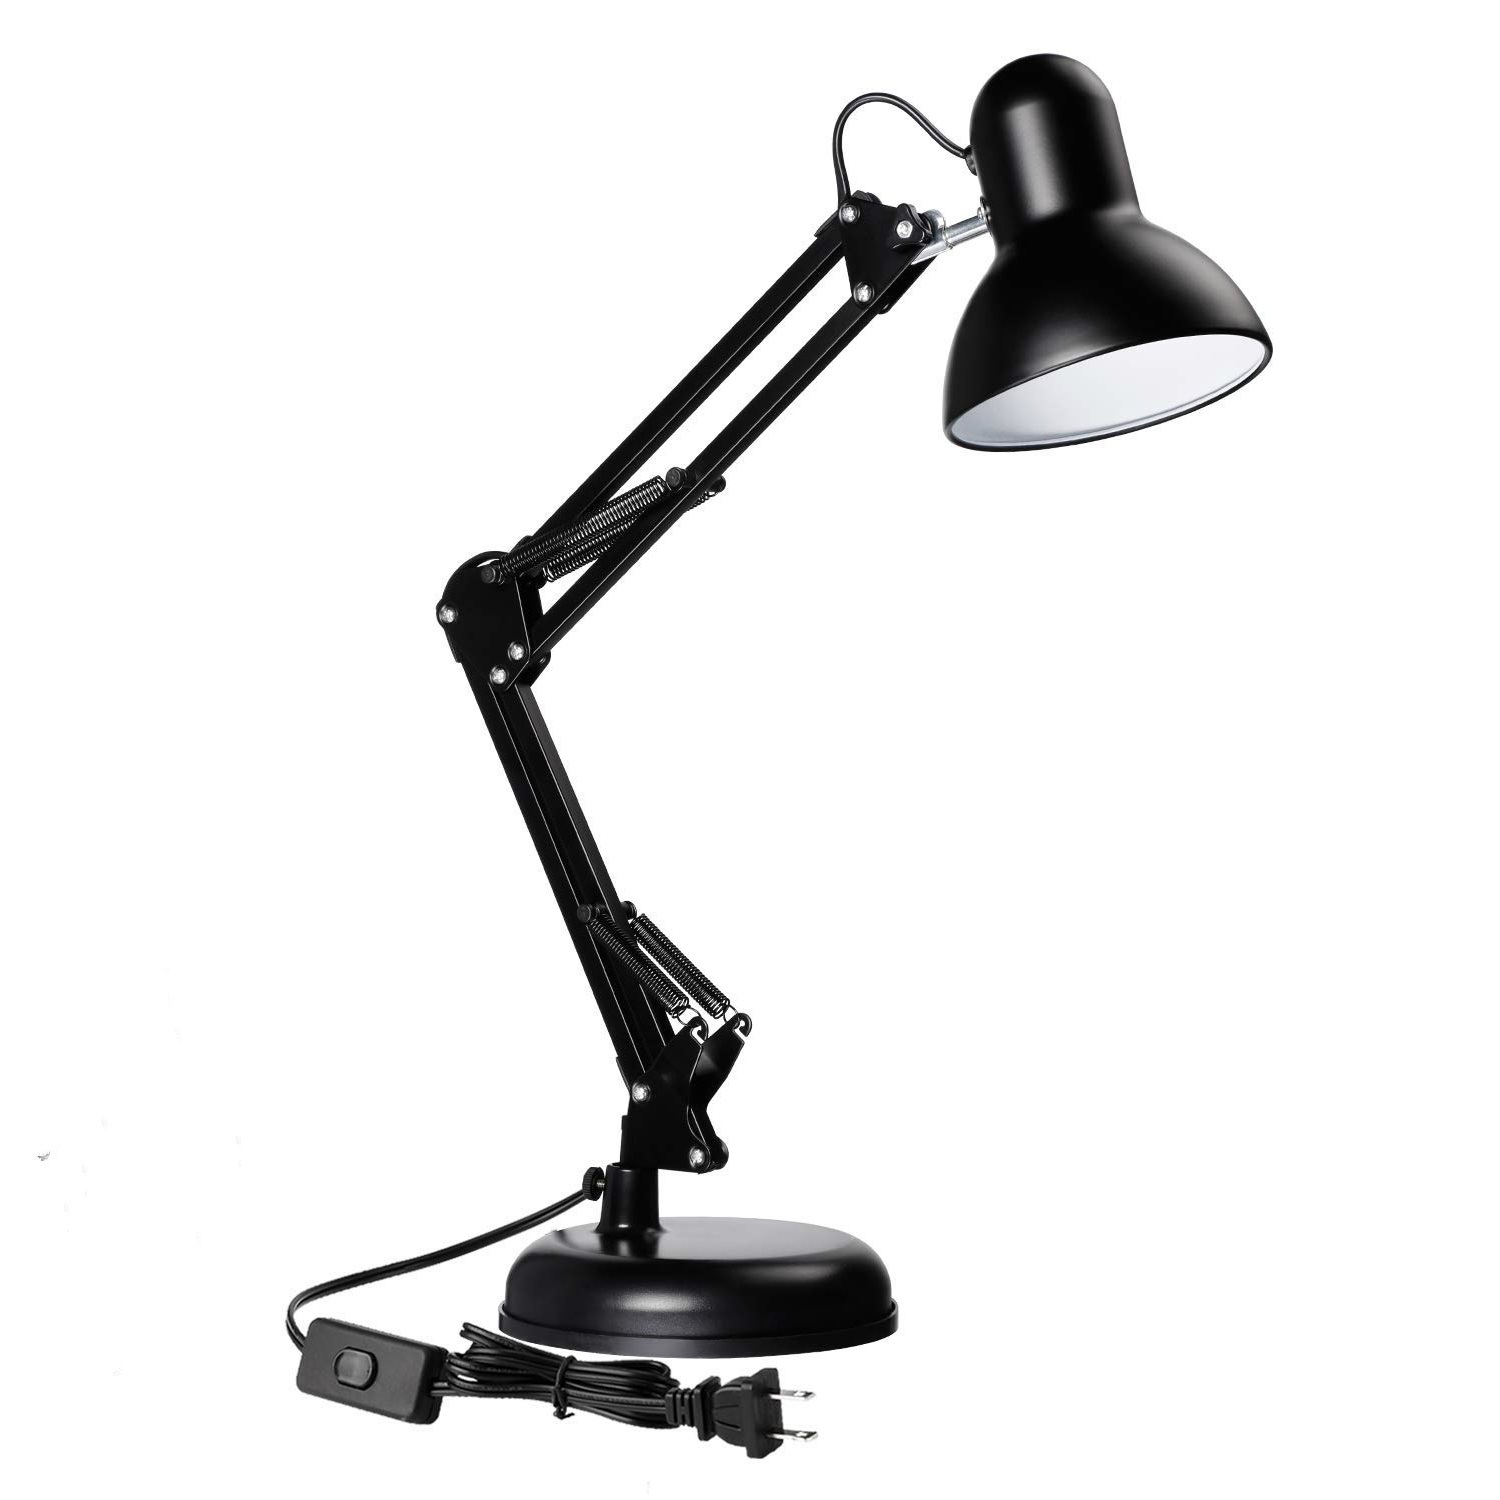 2in1 Adjustable Swing Arm Desk Lamp Architect Drafting Table Clamp On LED Light 